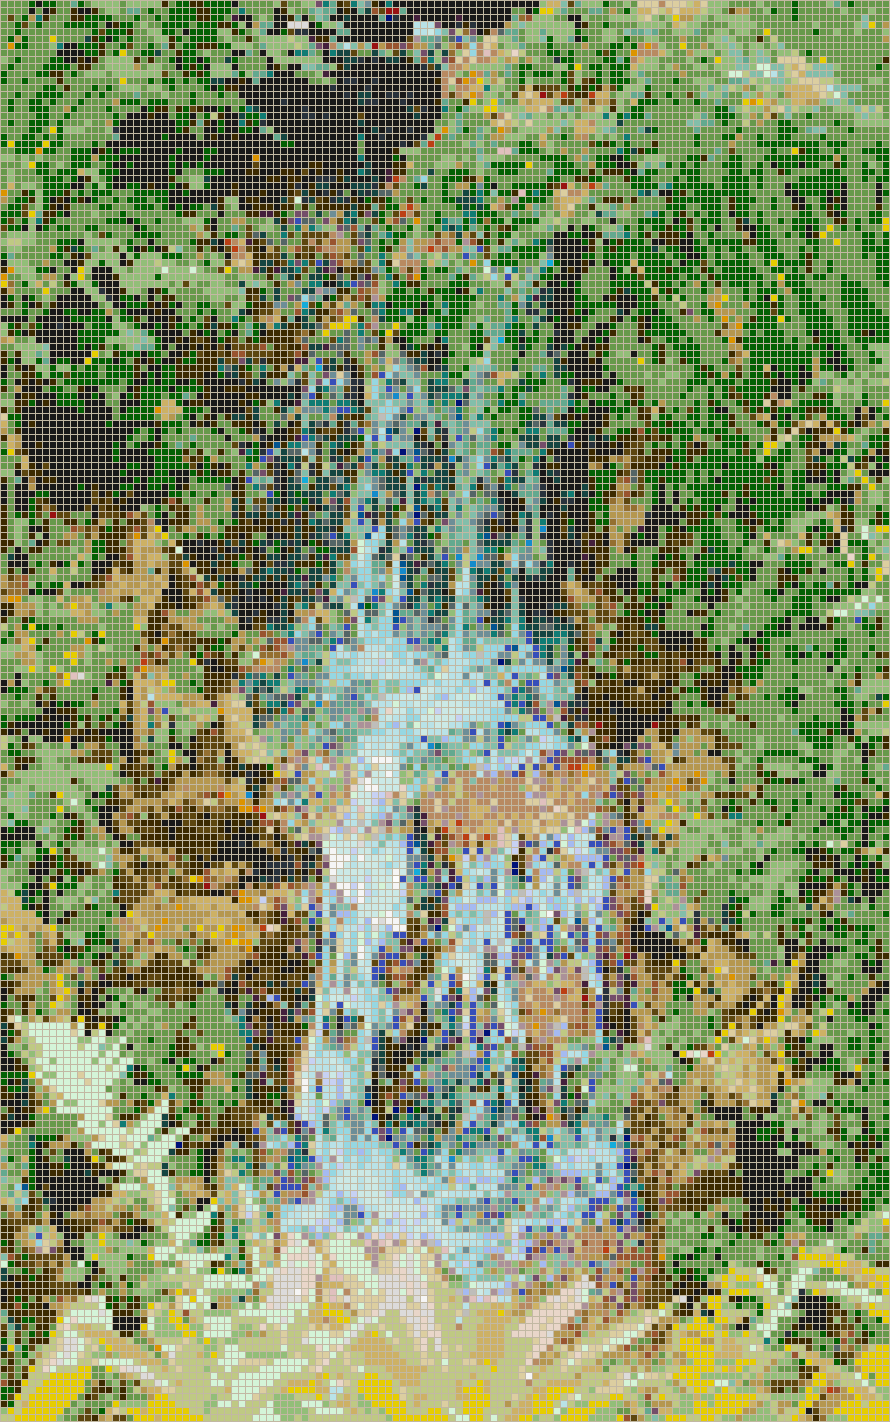 Small Waterfall - Mosaic Tile Picture Art